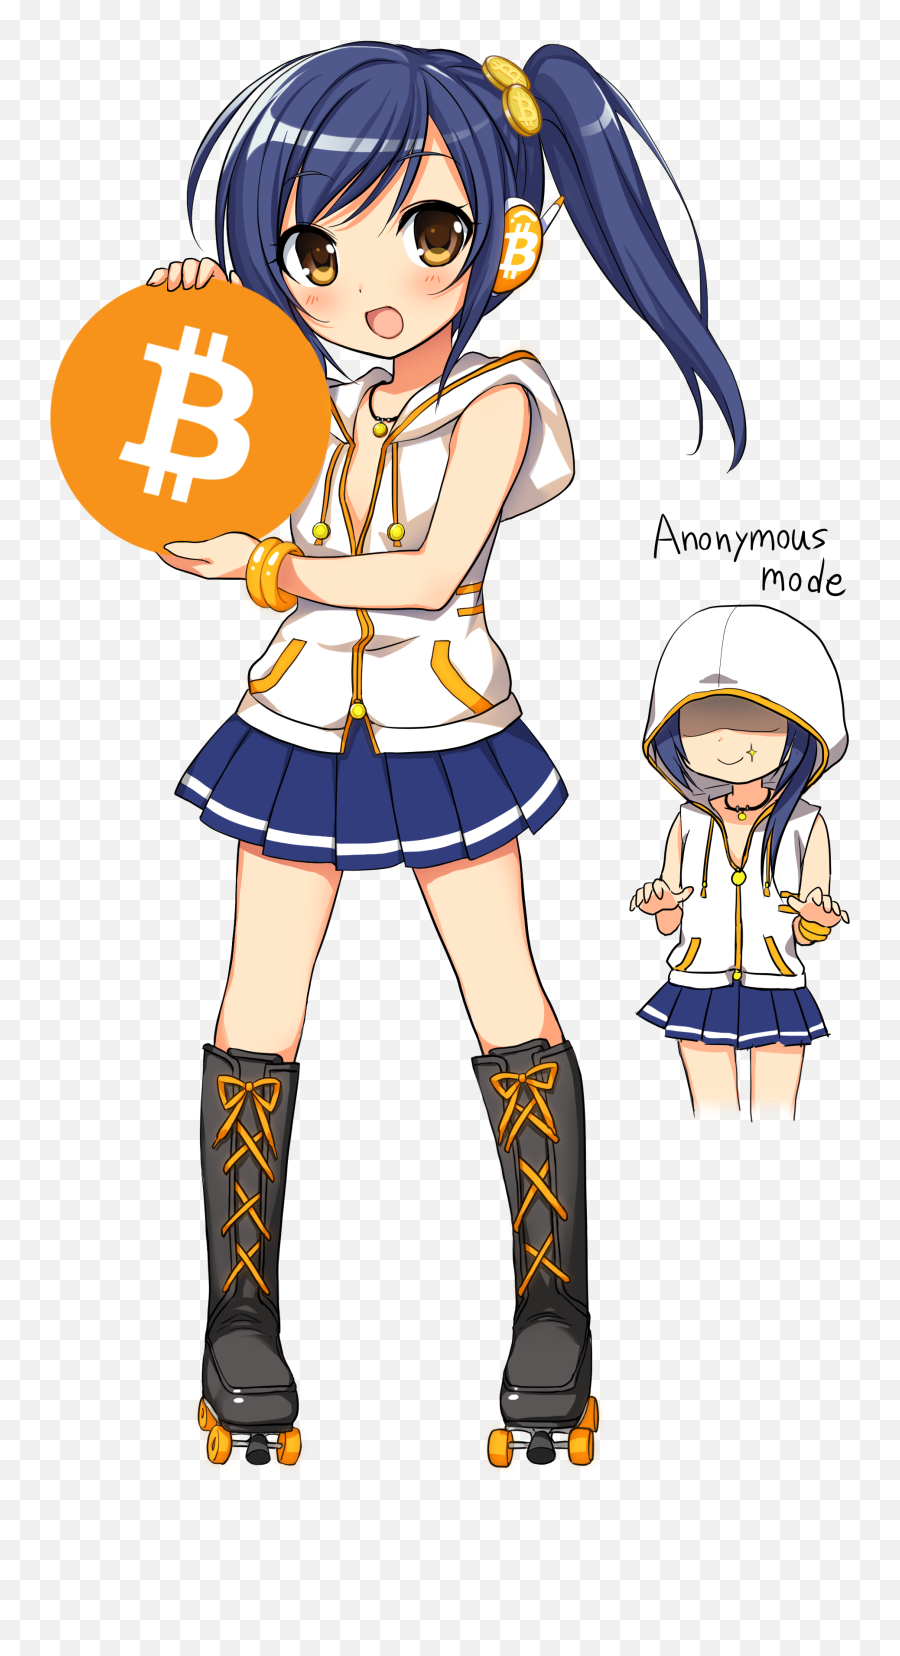 The Amazing Bitcoin - Chan Shameless Repost Bitcoin Monero Chan Png,Teamspeak Founder Icon